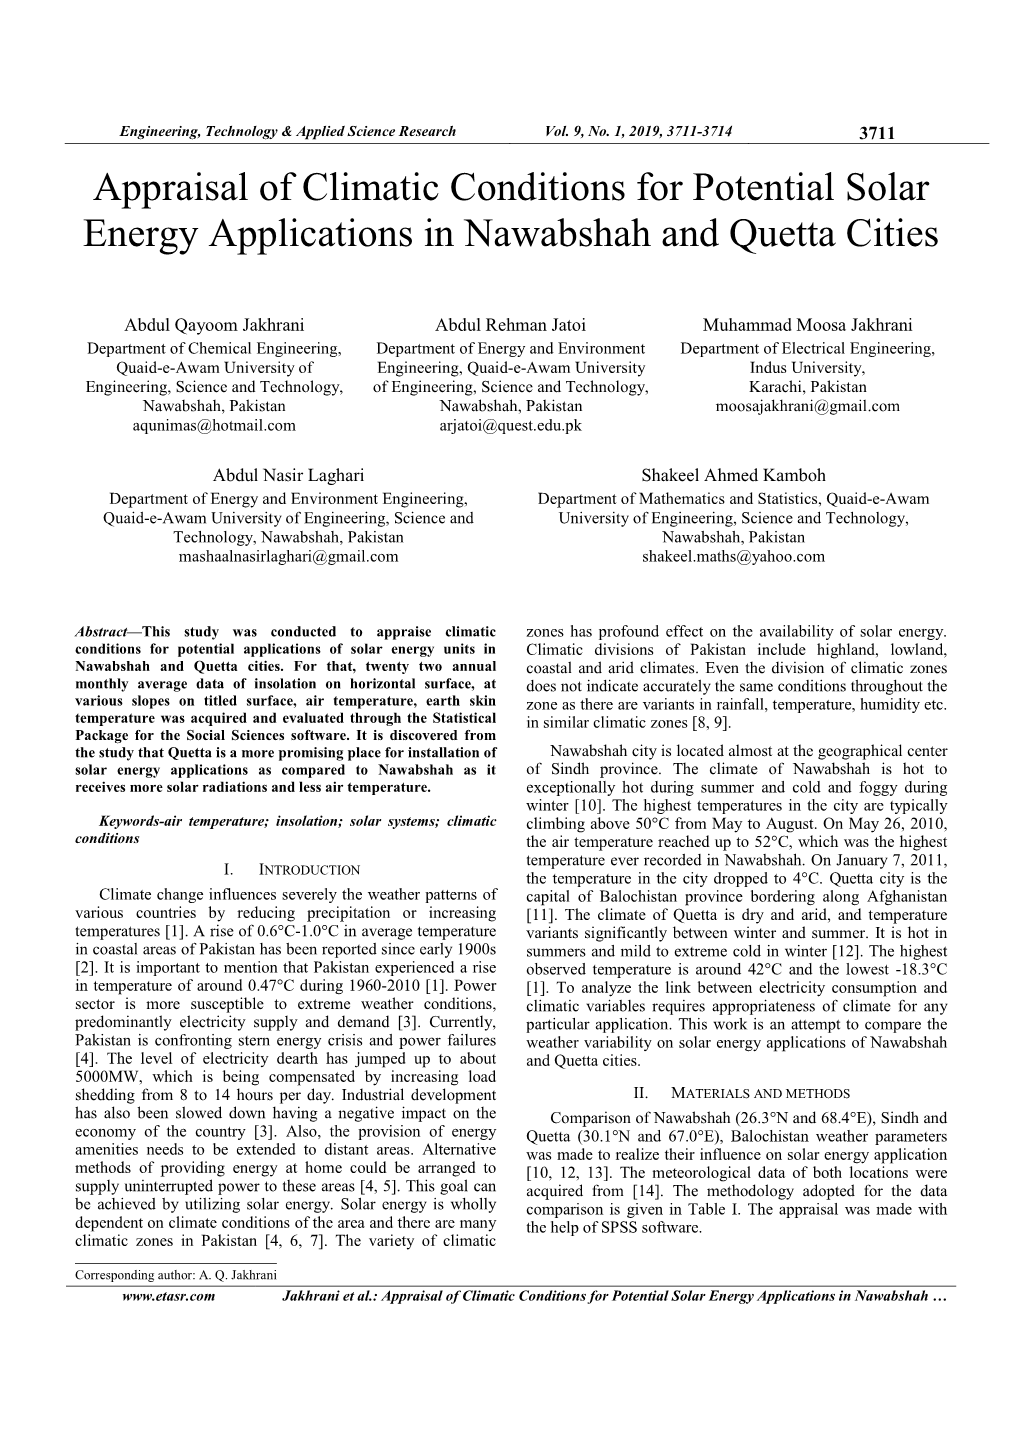 Appraisal of Climatic Conditions for Potential Solar Energy Applications in Nawabshah and Quetta Cities